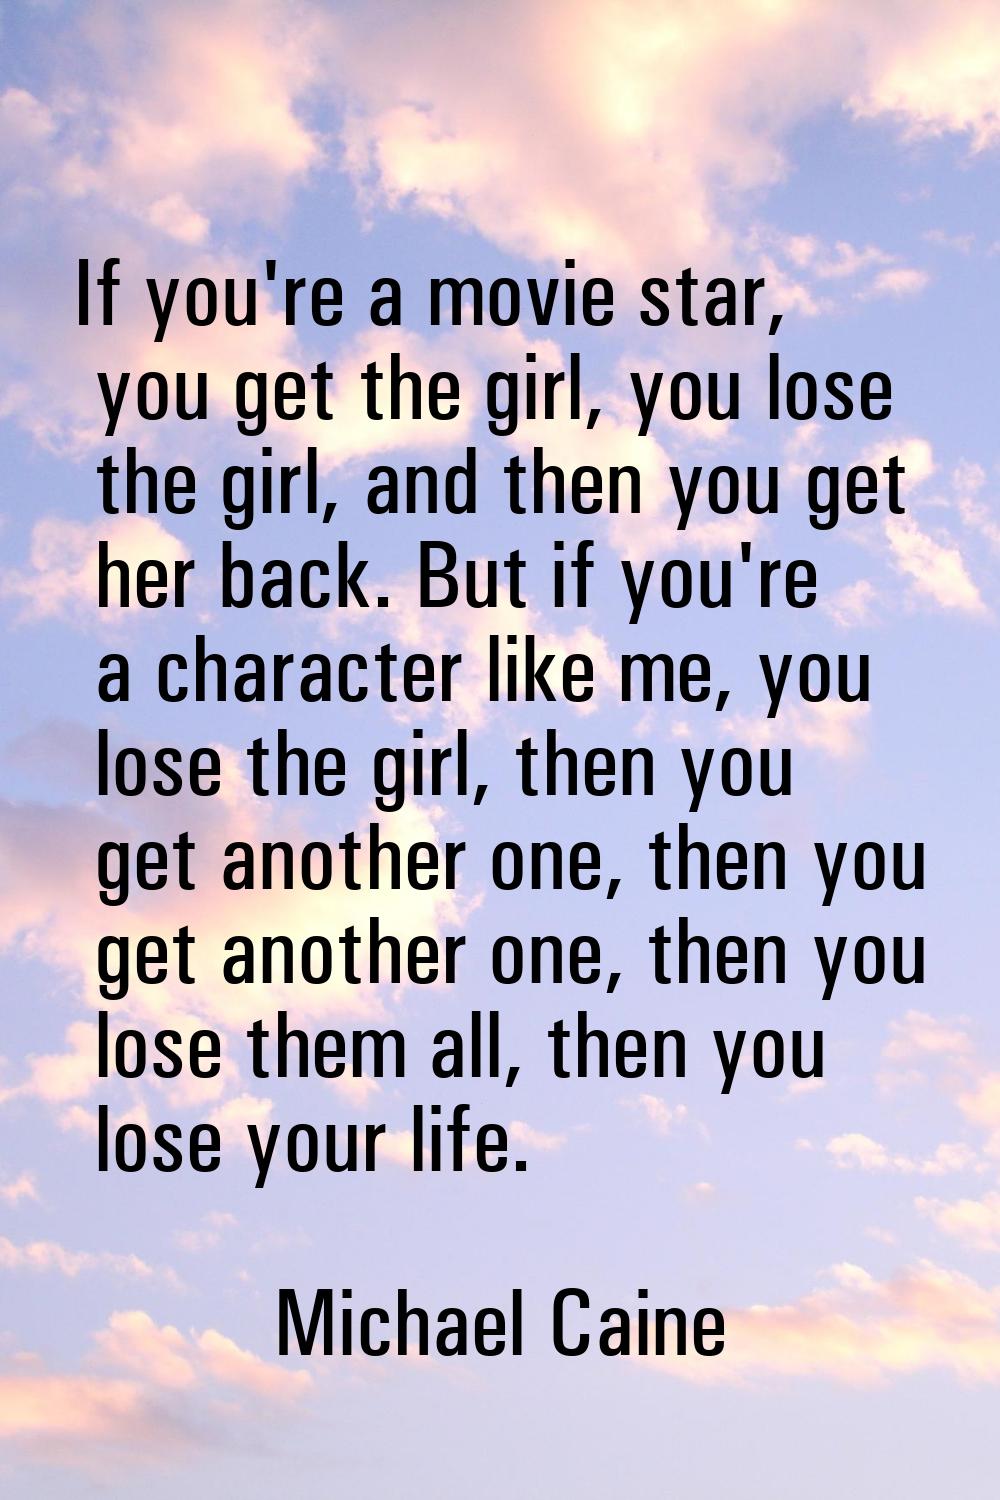 If you're a movie star, you get the girl, you lose the girl, and then you get her back. But if you'